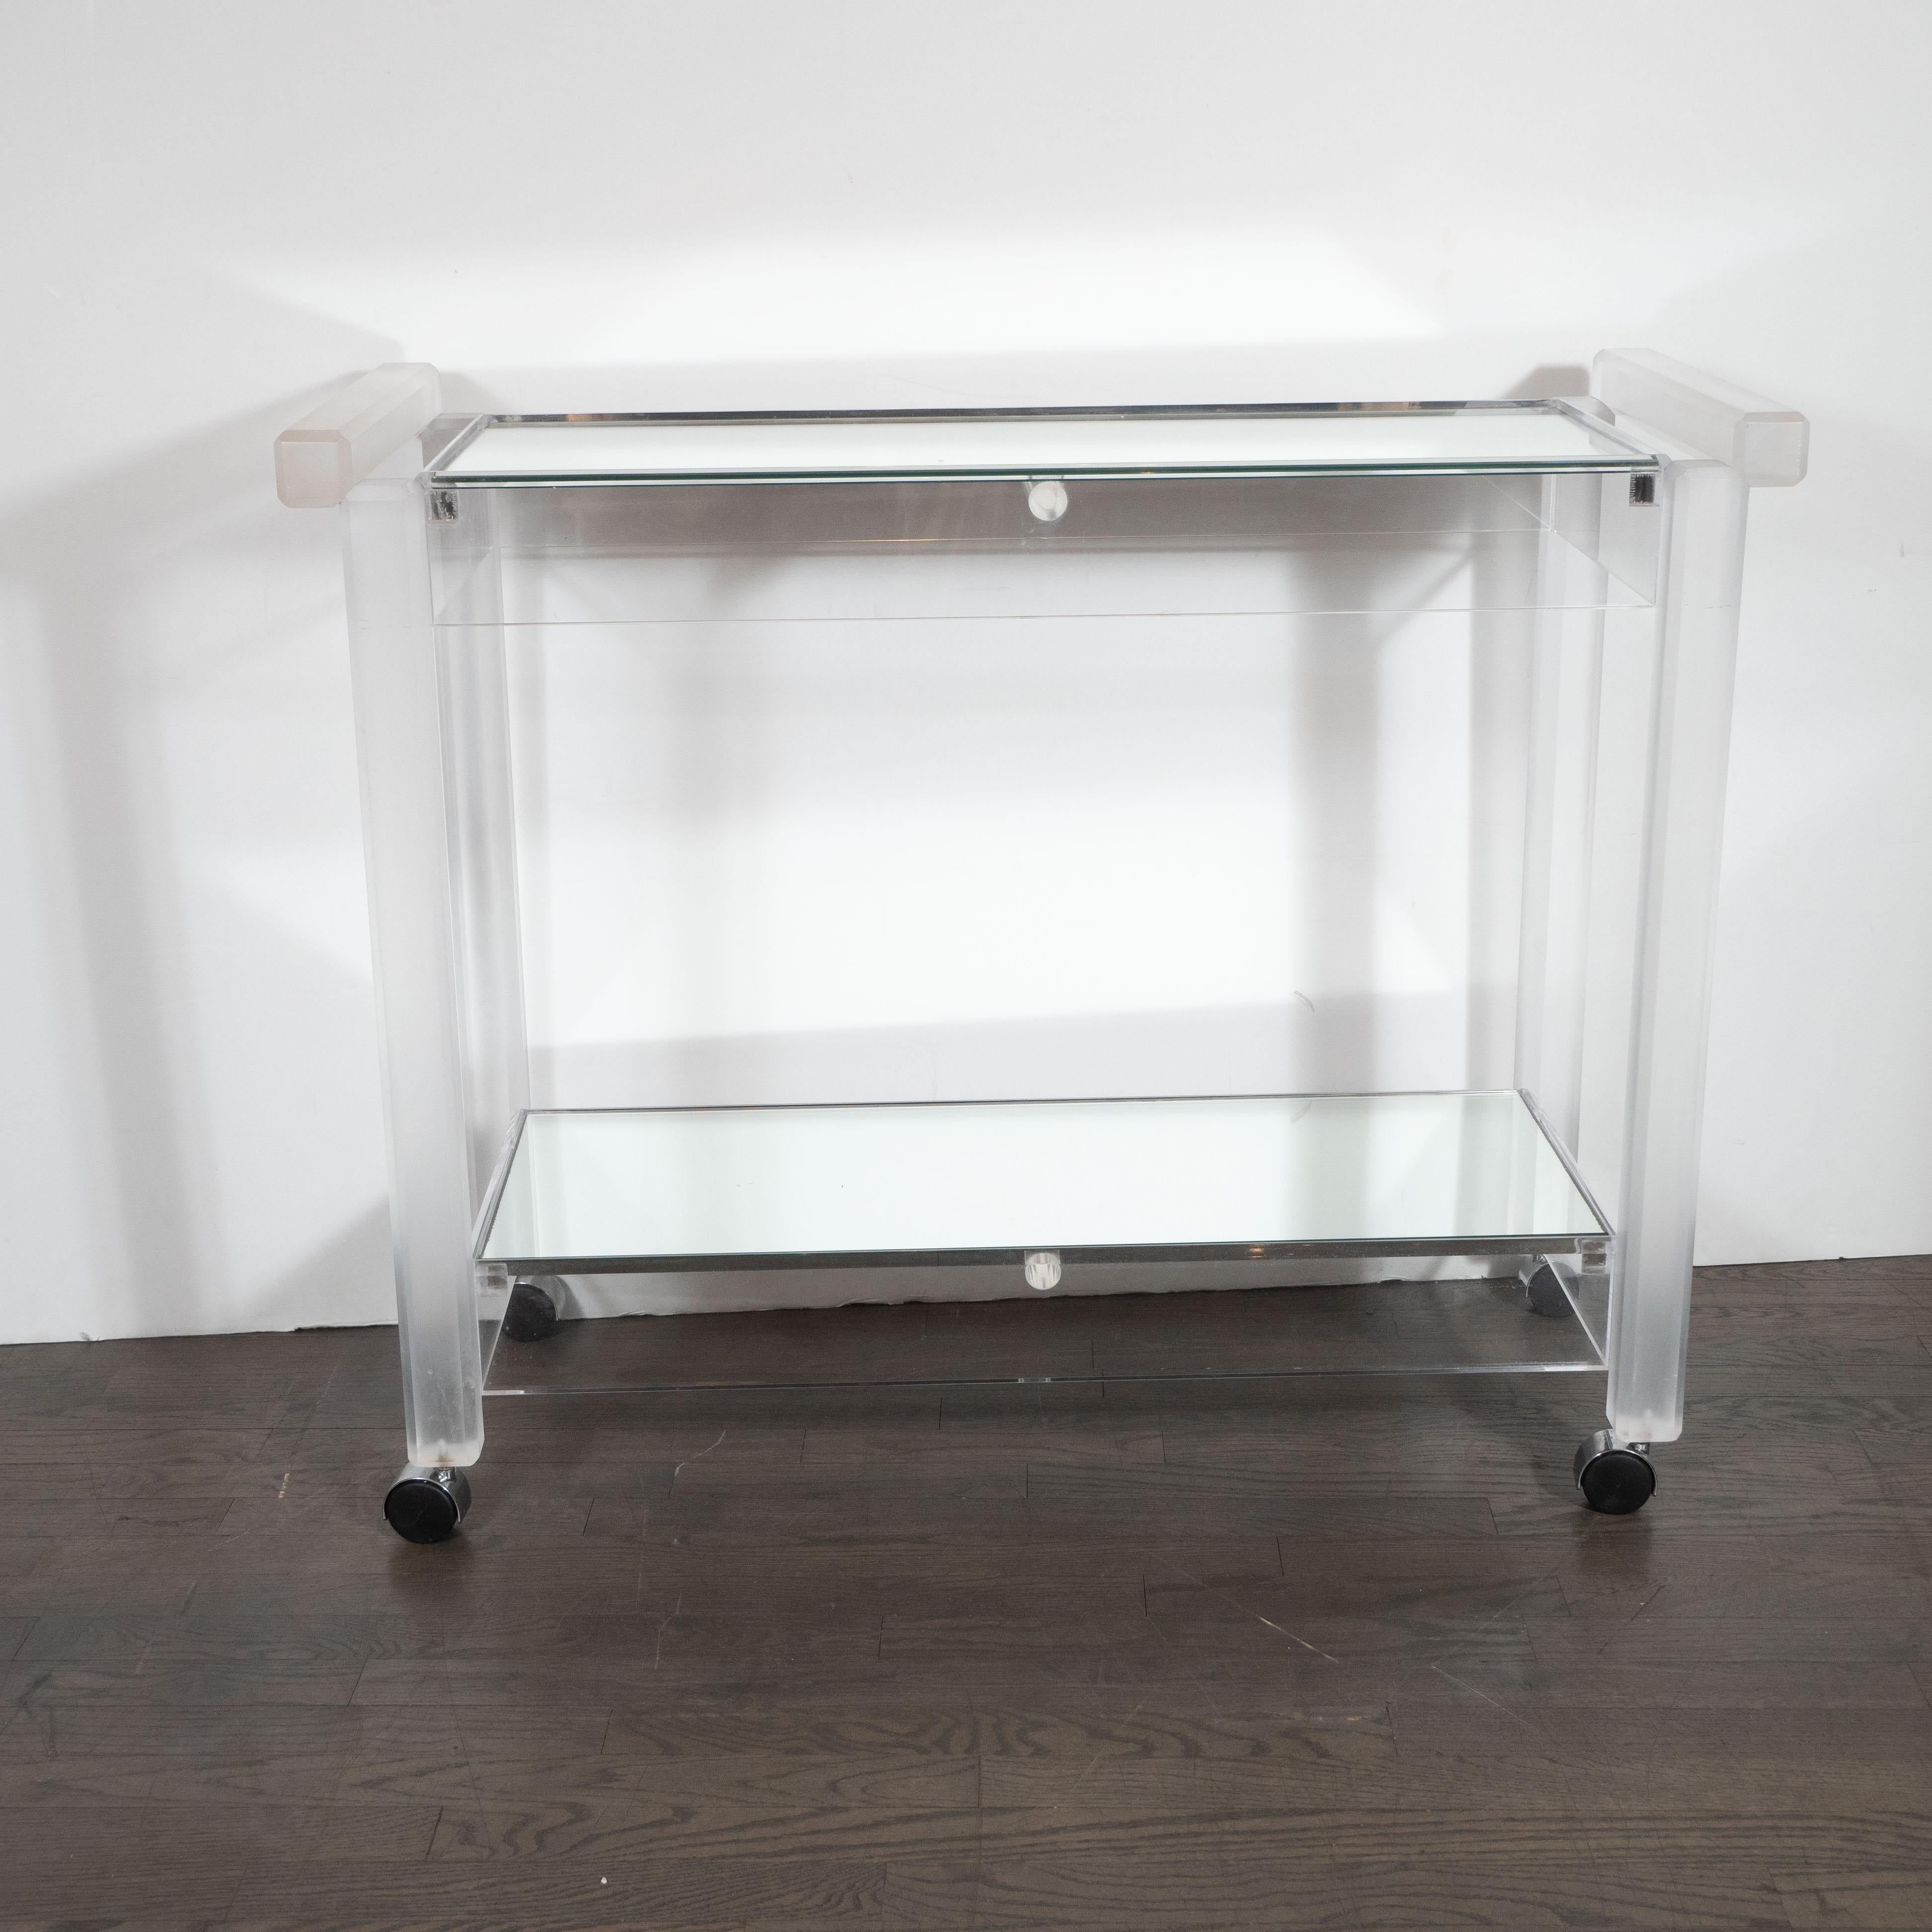 This refined and sexy bar cart was realized in the United States circa 1970 by the esteemed maker The Lion Frost Company. It features a rectilinear body composed of frosted lucite with two mirrored trays- perfect for storing bottles and bar